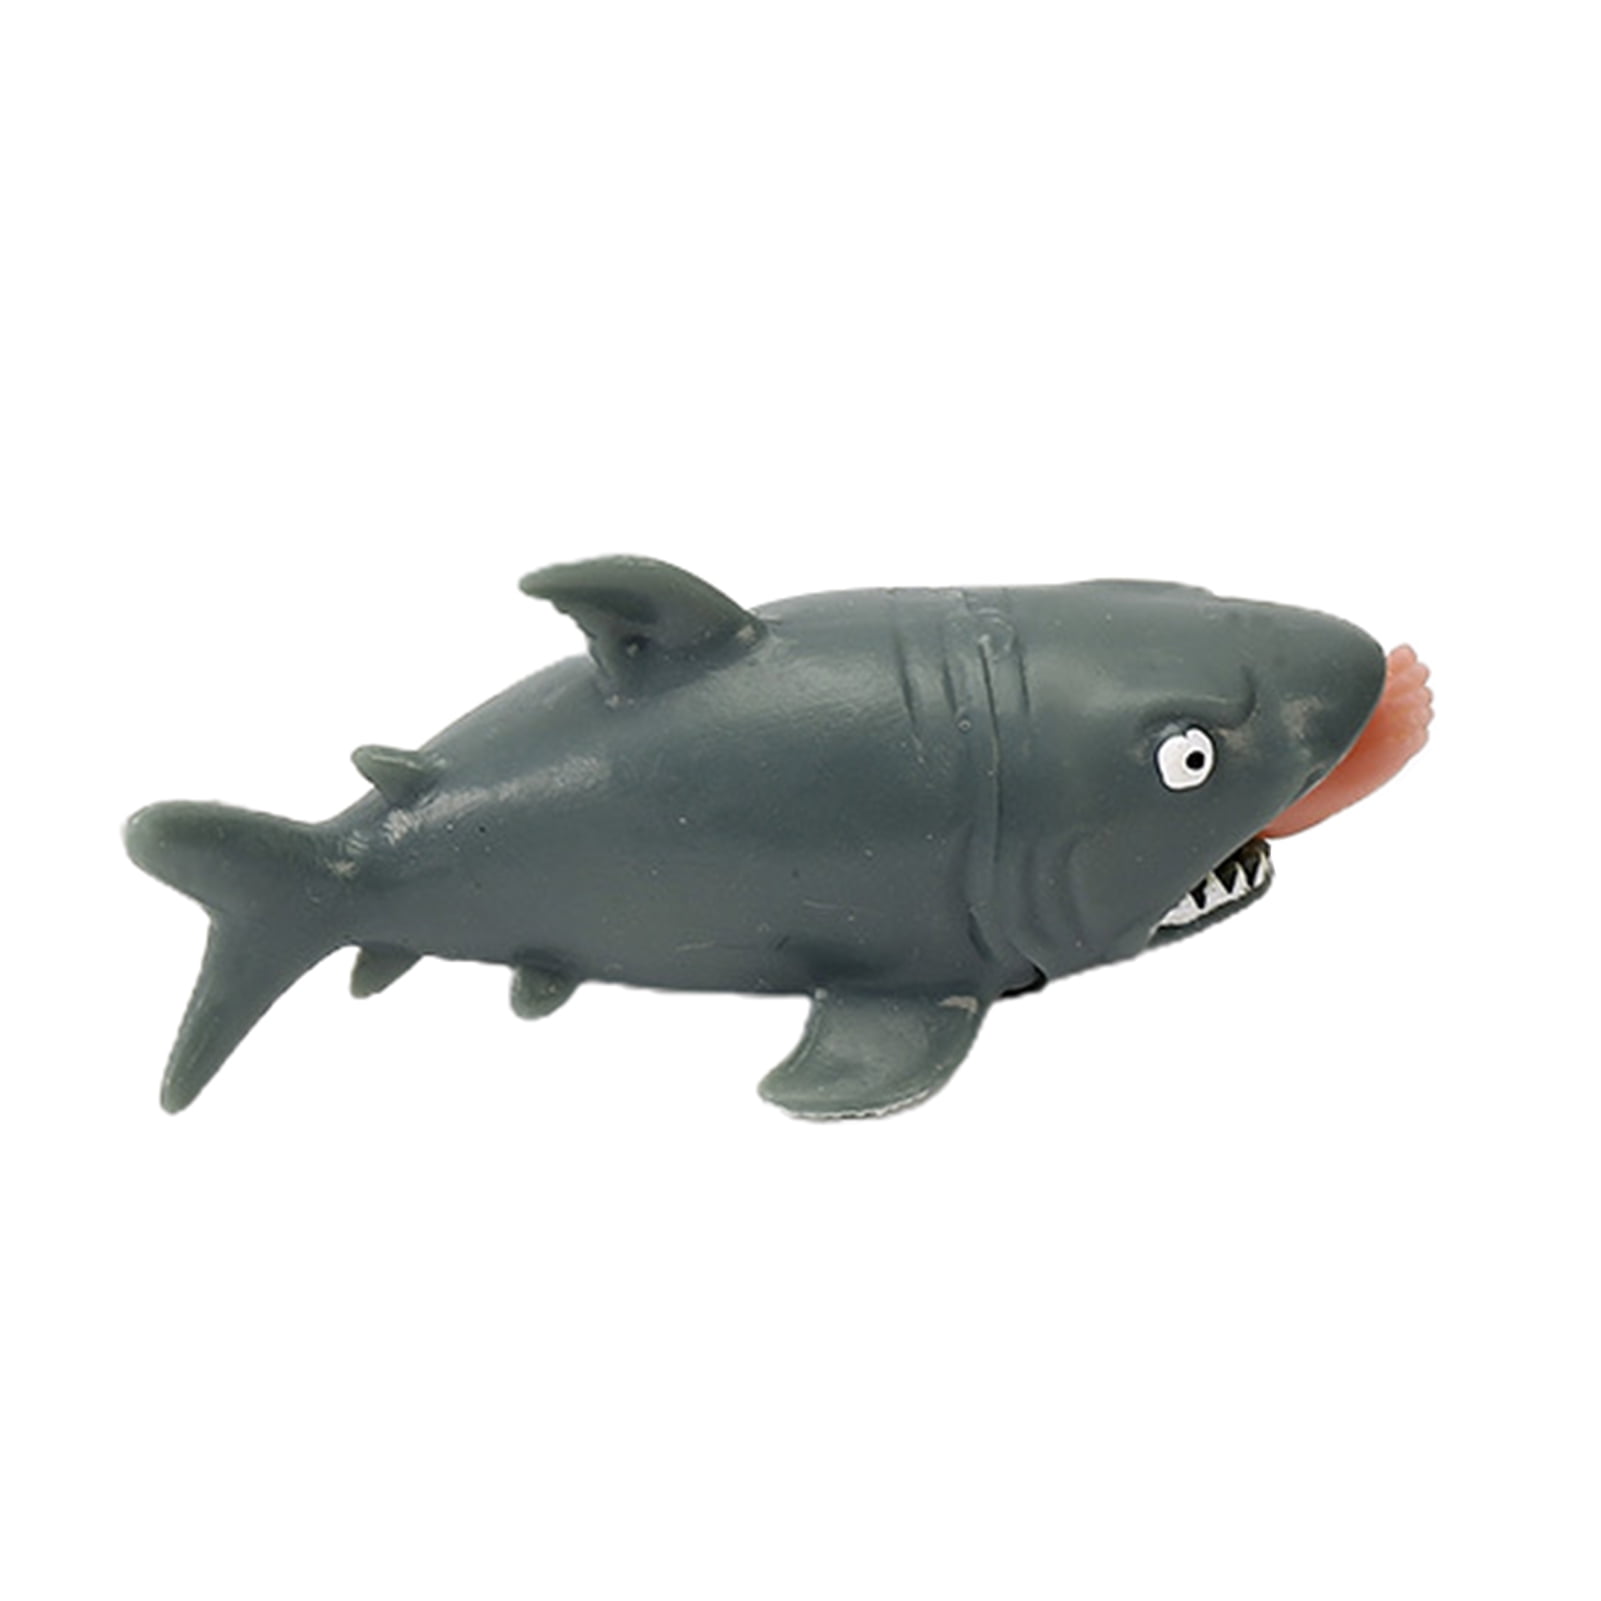 Shark Model Prank Squeeze Stress Relief Massage Toy Gift Novelty